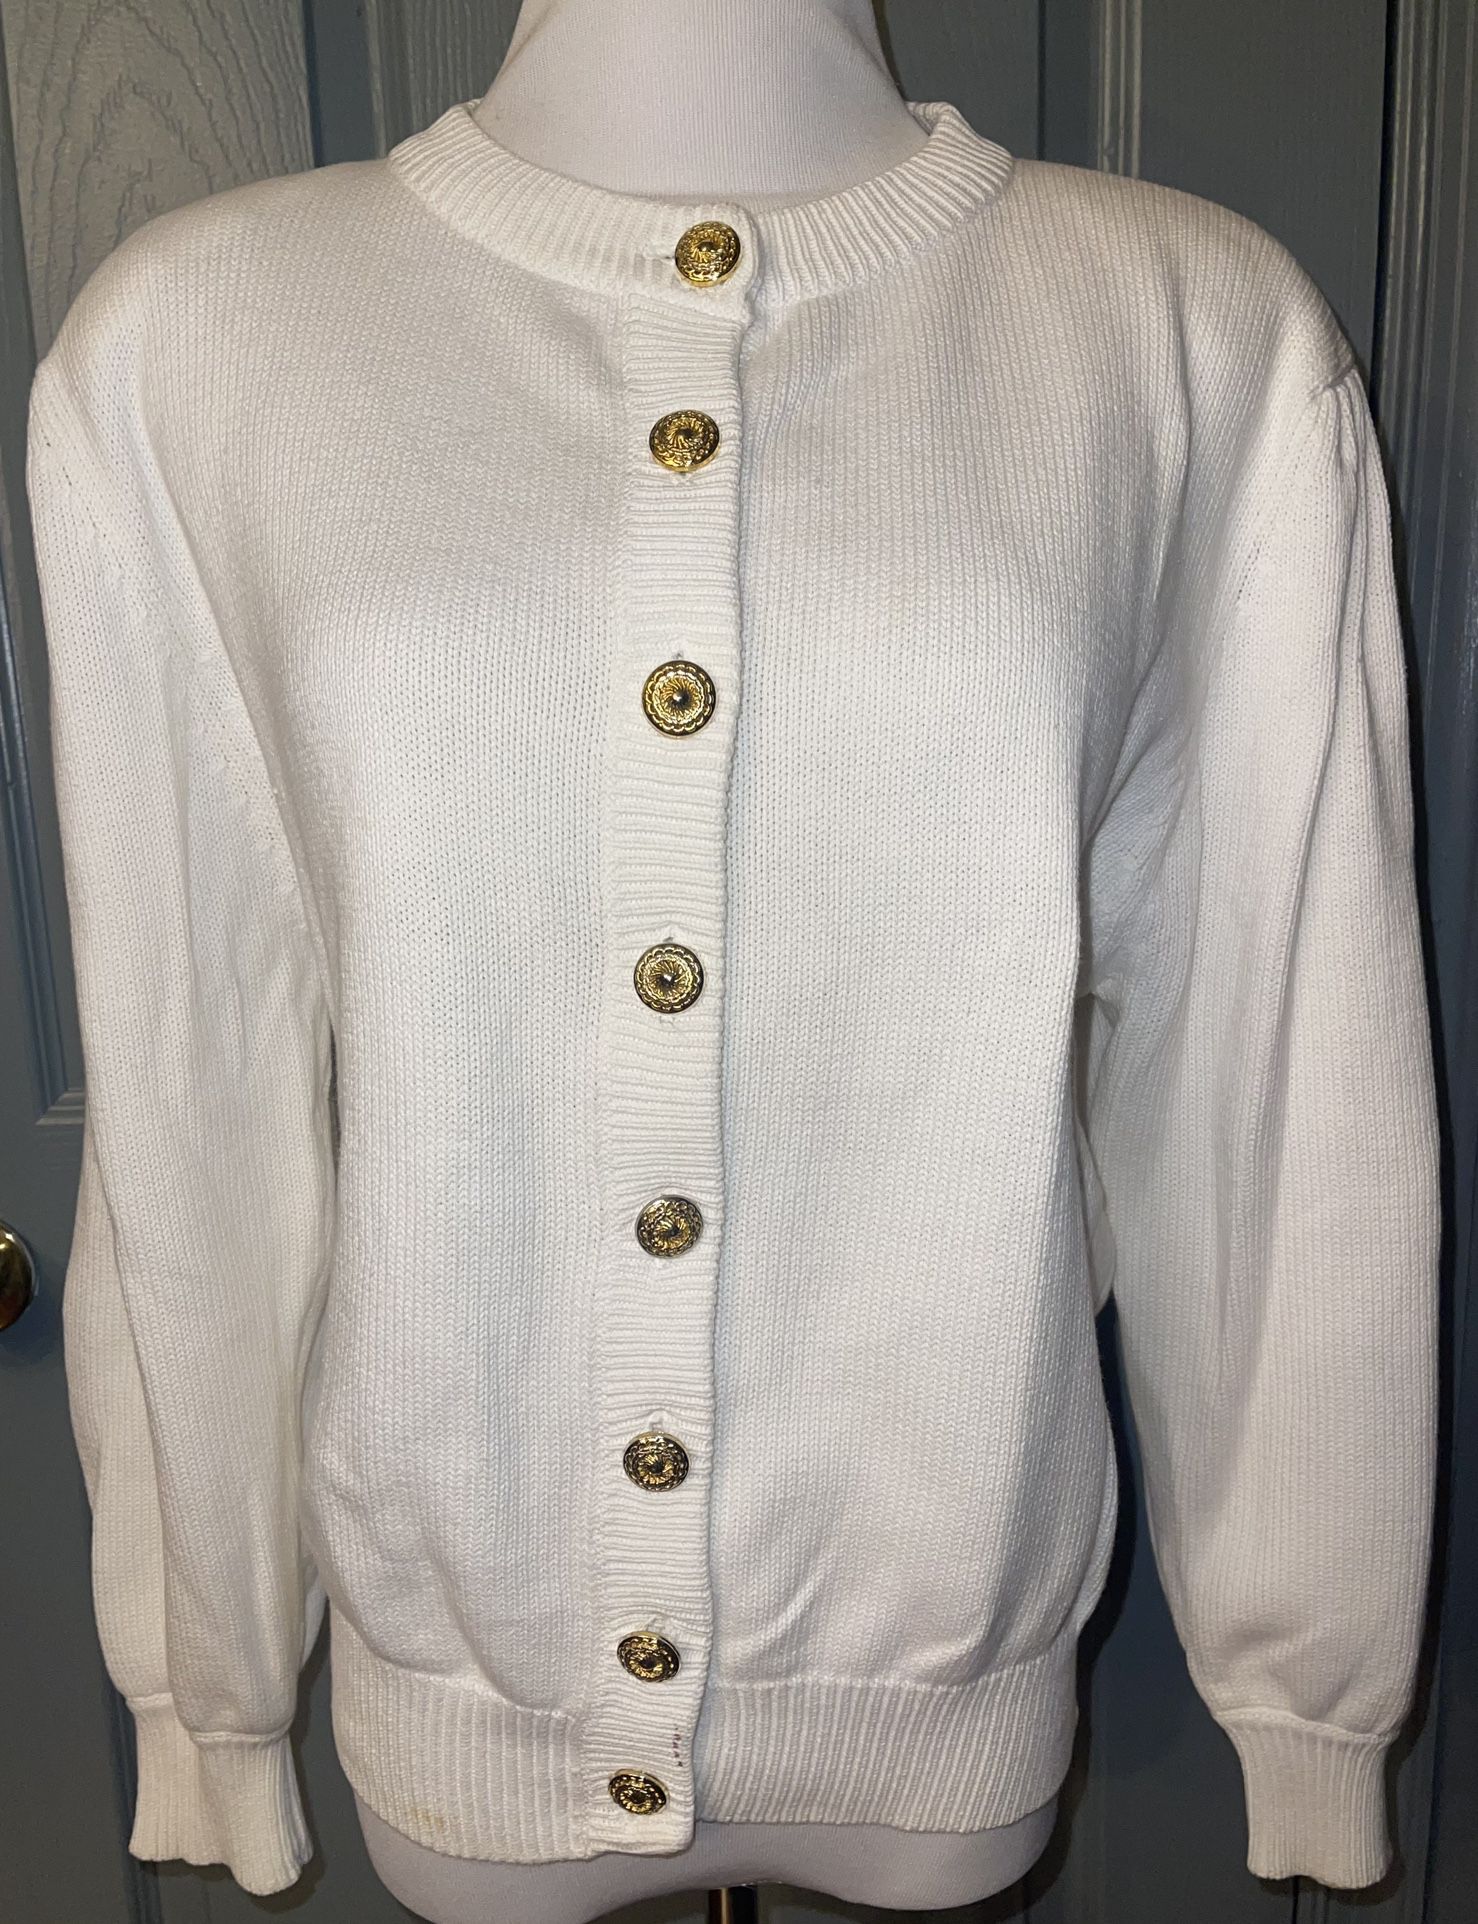 Nordstrom Town Square Vintage 90s 100%Cotton Gold Buttons White Cardigan Sweater.